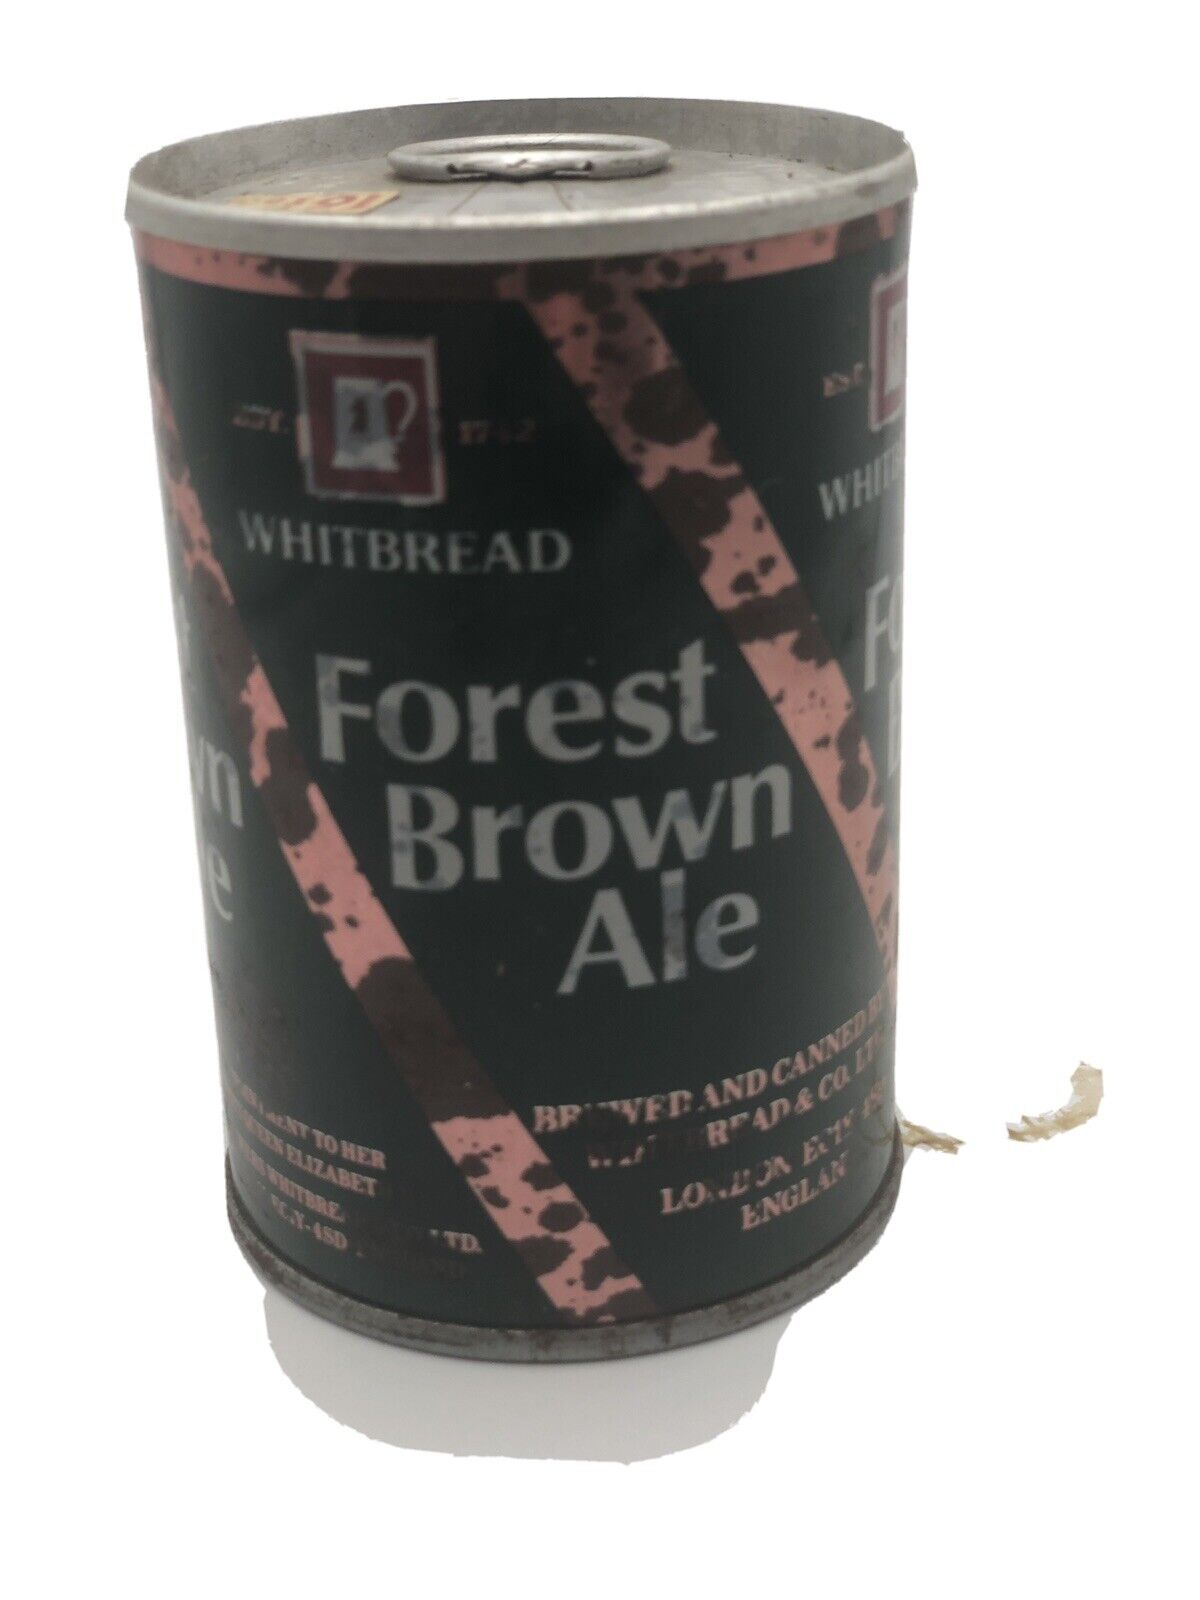 Forest Brown Ale Whitbread 9 2/3 Imp Oz